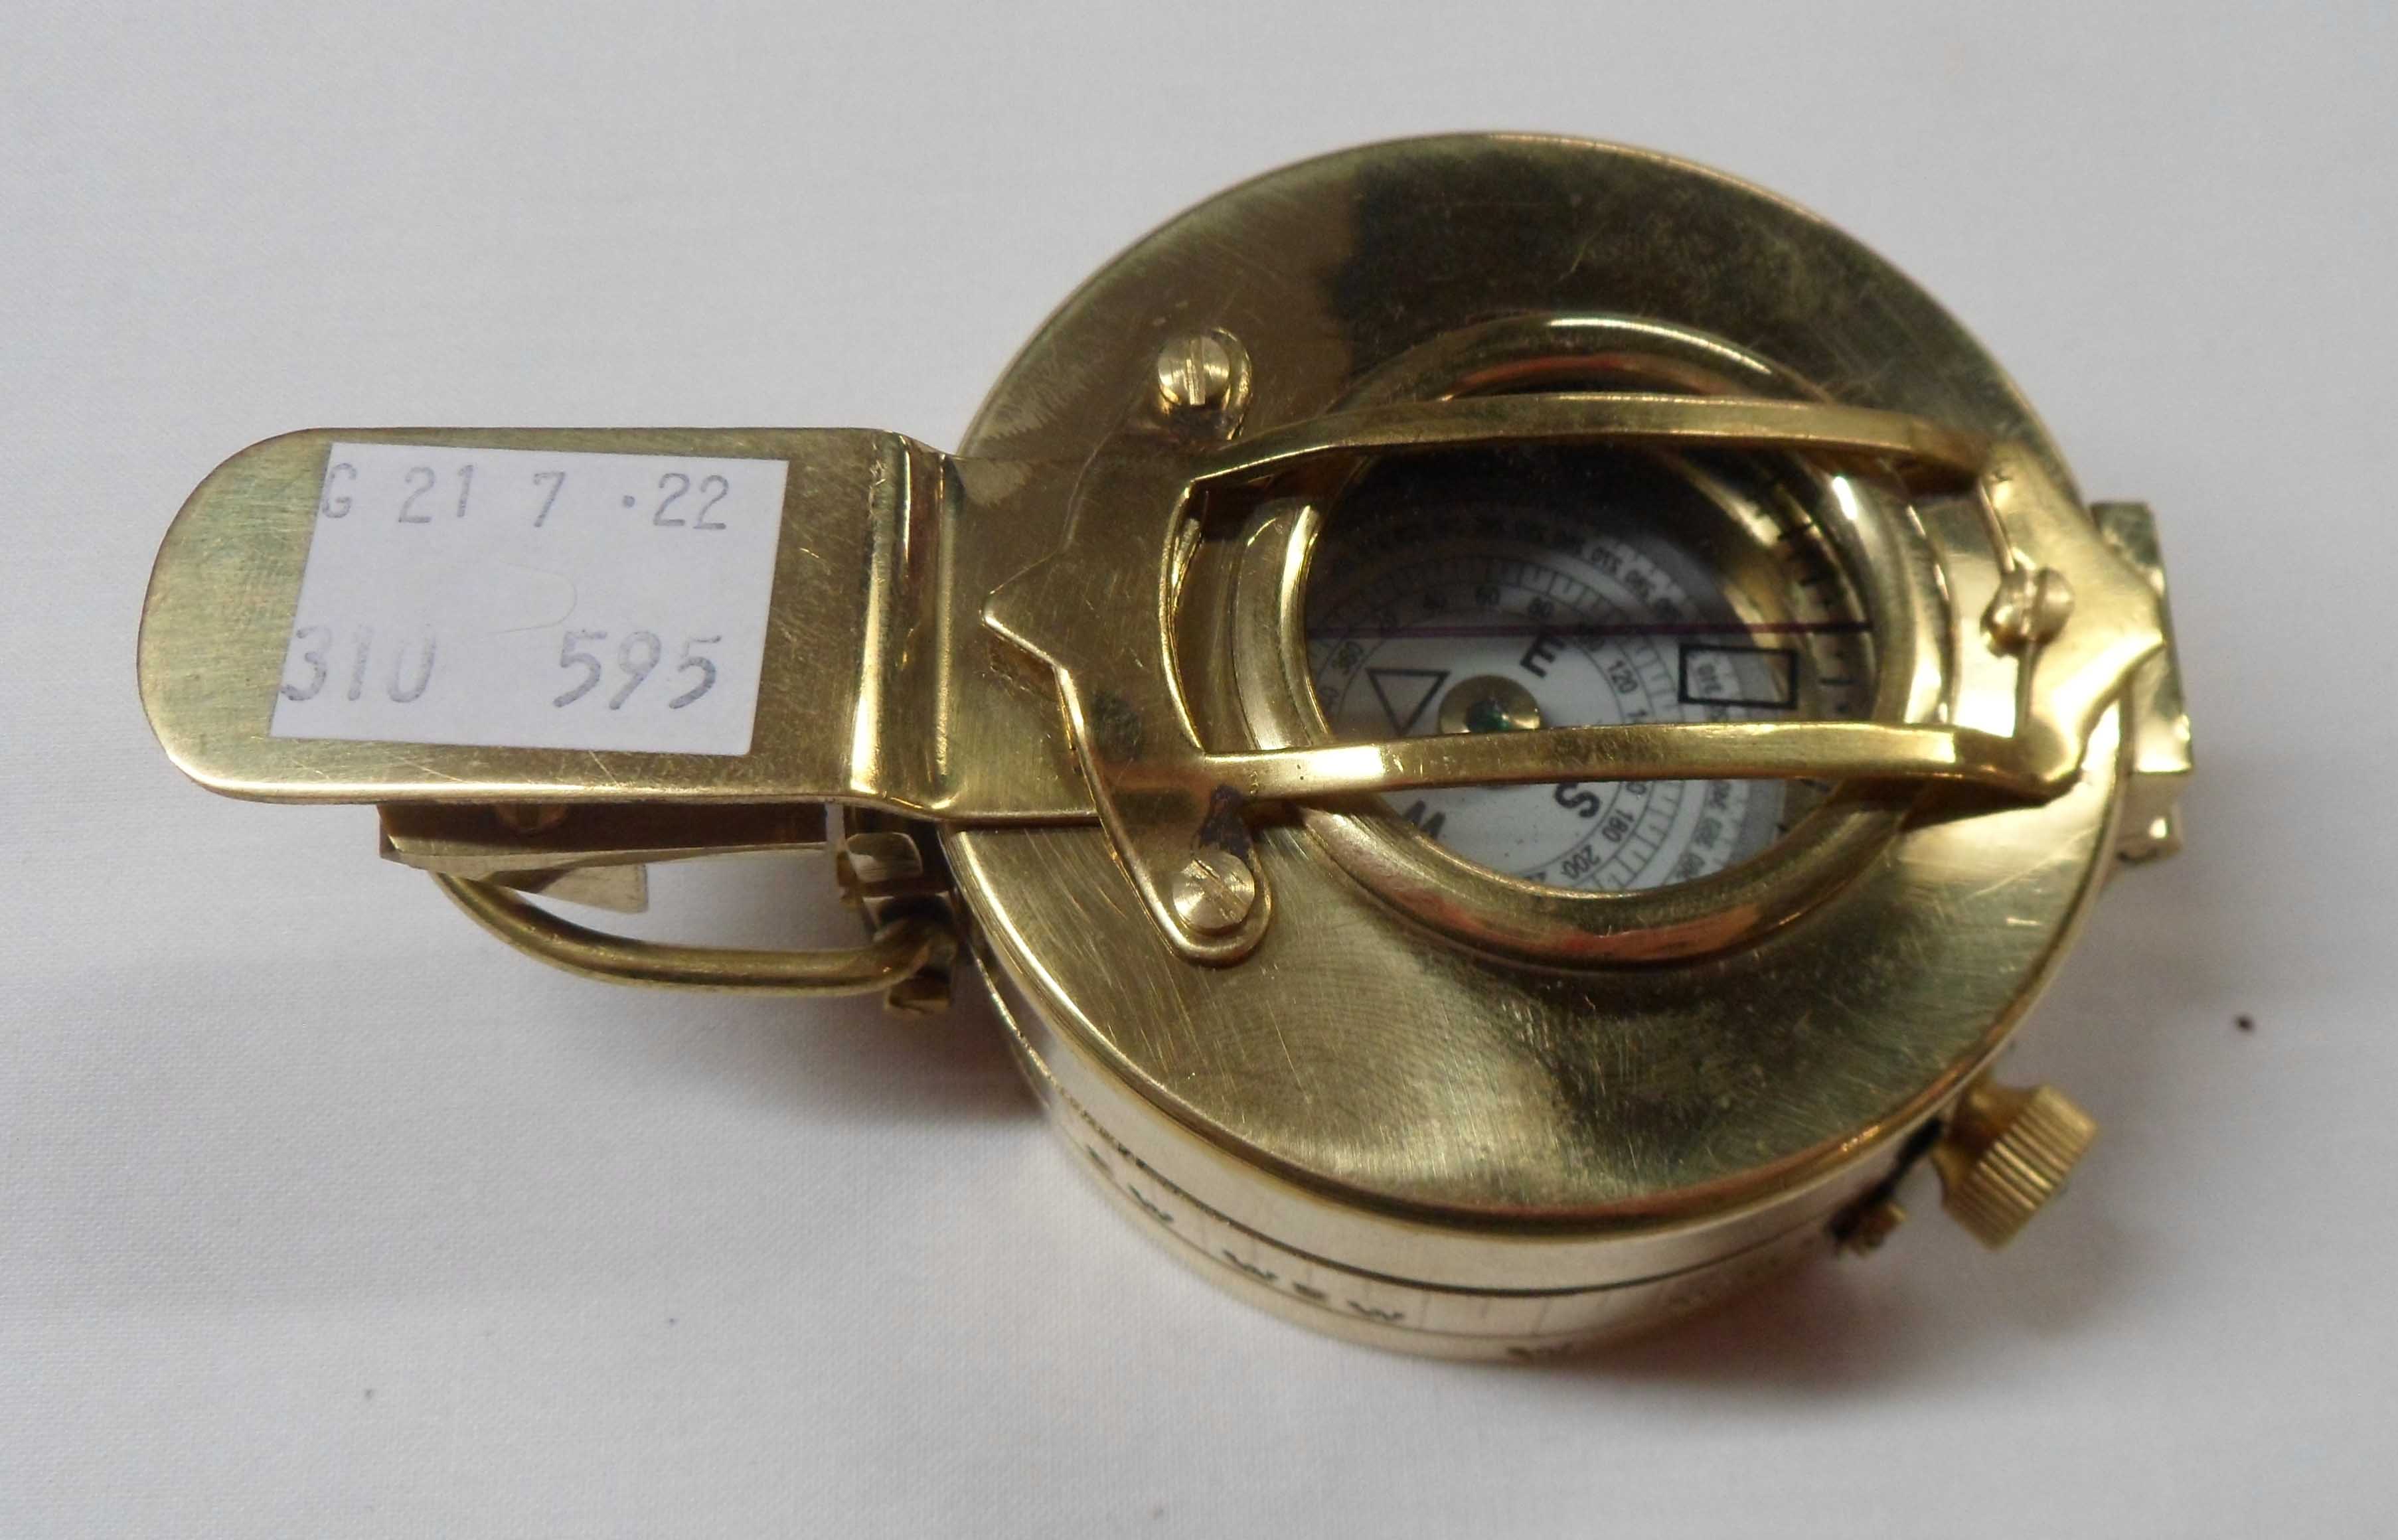 A modern reproduction brass military style compass